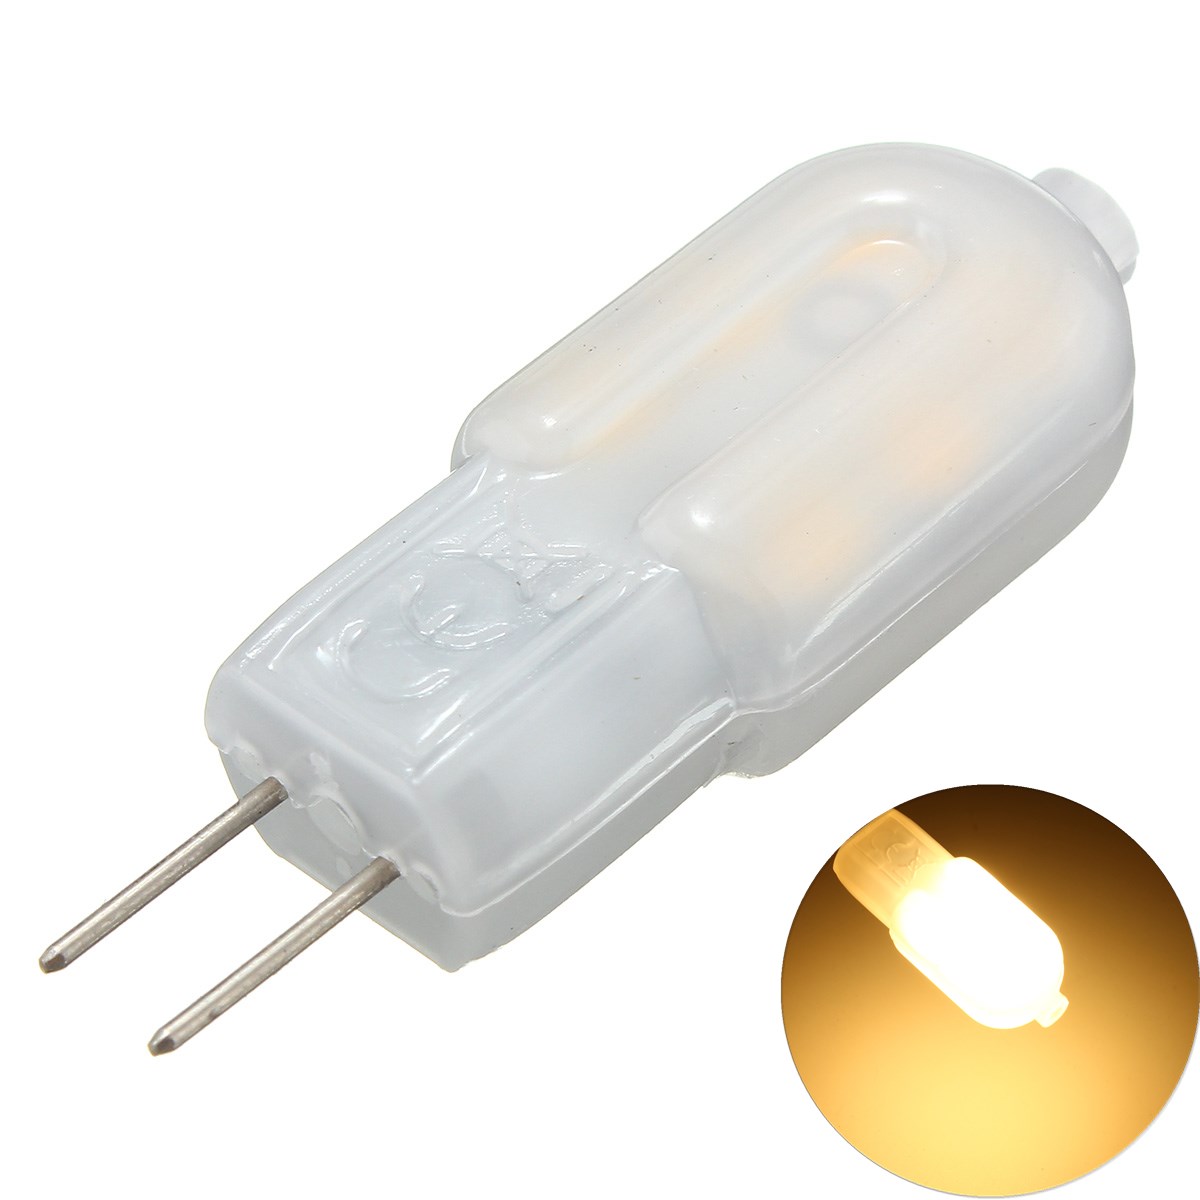 

6PCS DC12V G4 2W SMD2835 Non-dimmable Warm White LED Light Bulb for Indoor Home Decor